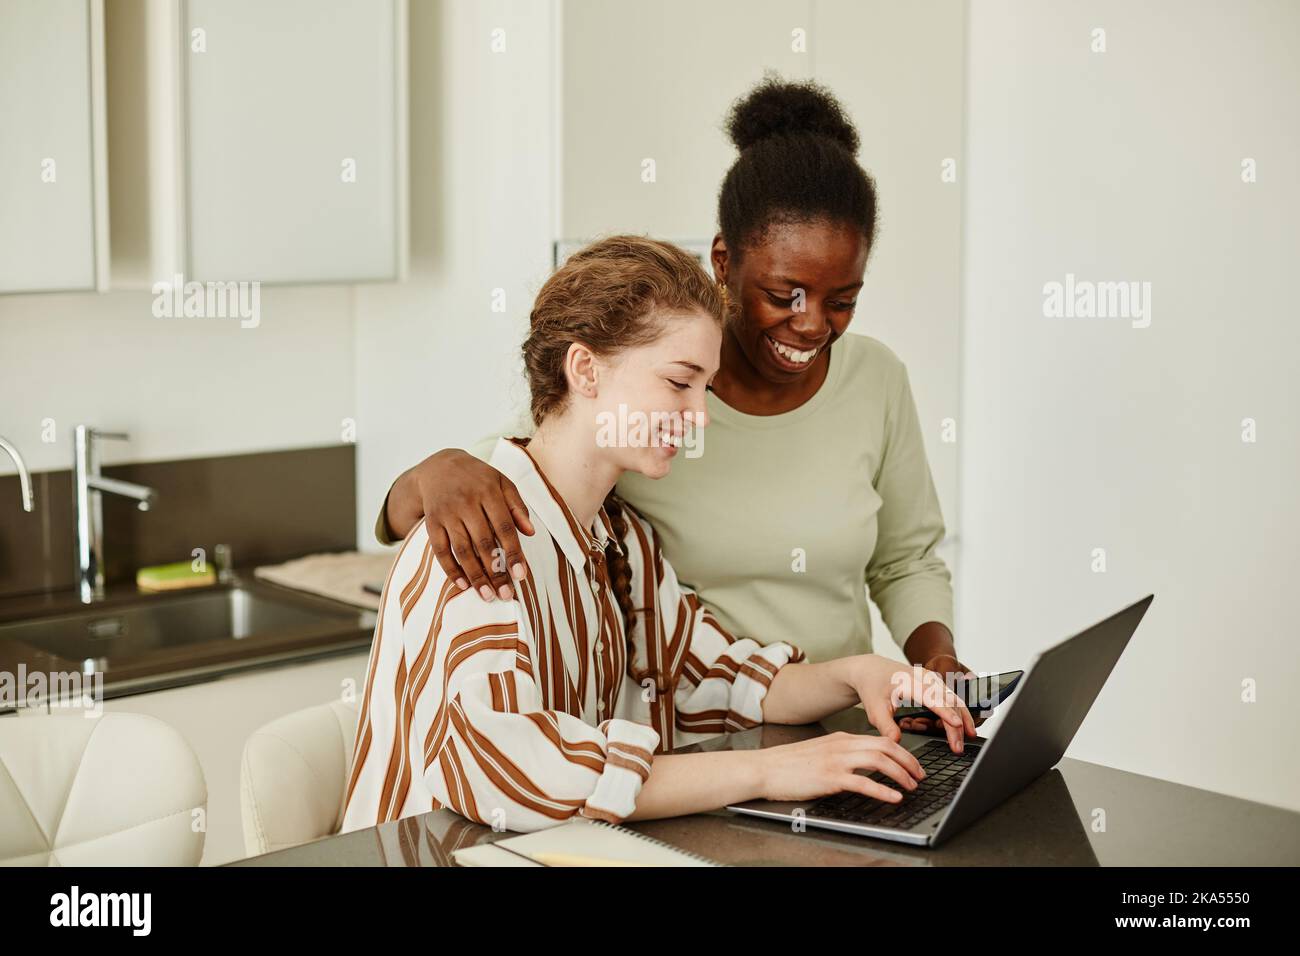 Portrait of two smiling young women using laptop together at home while managing small business or studying online Stock Photo